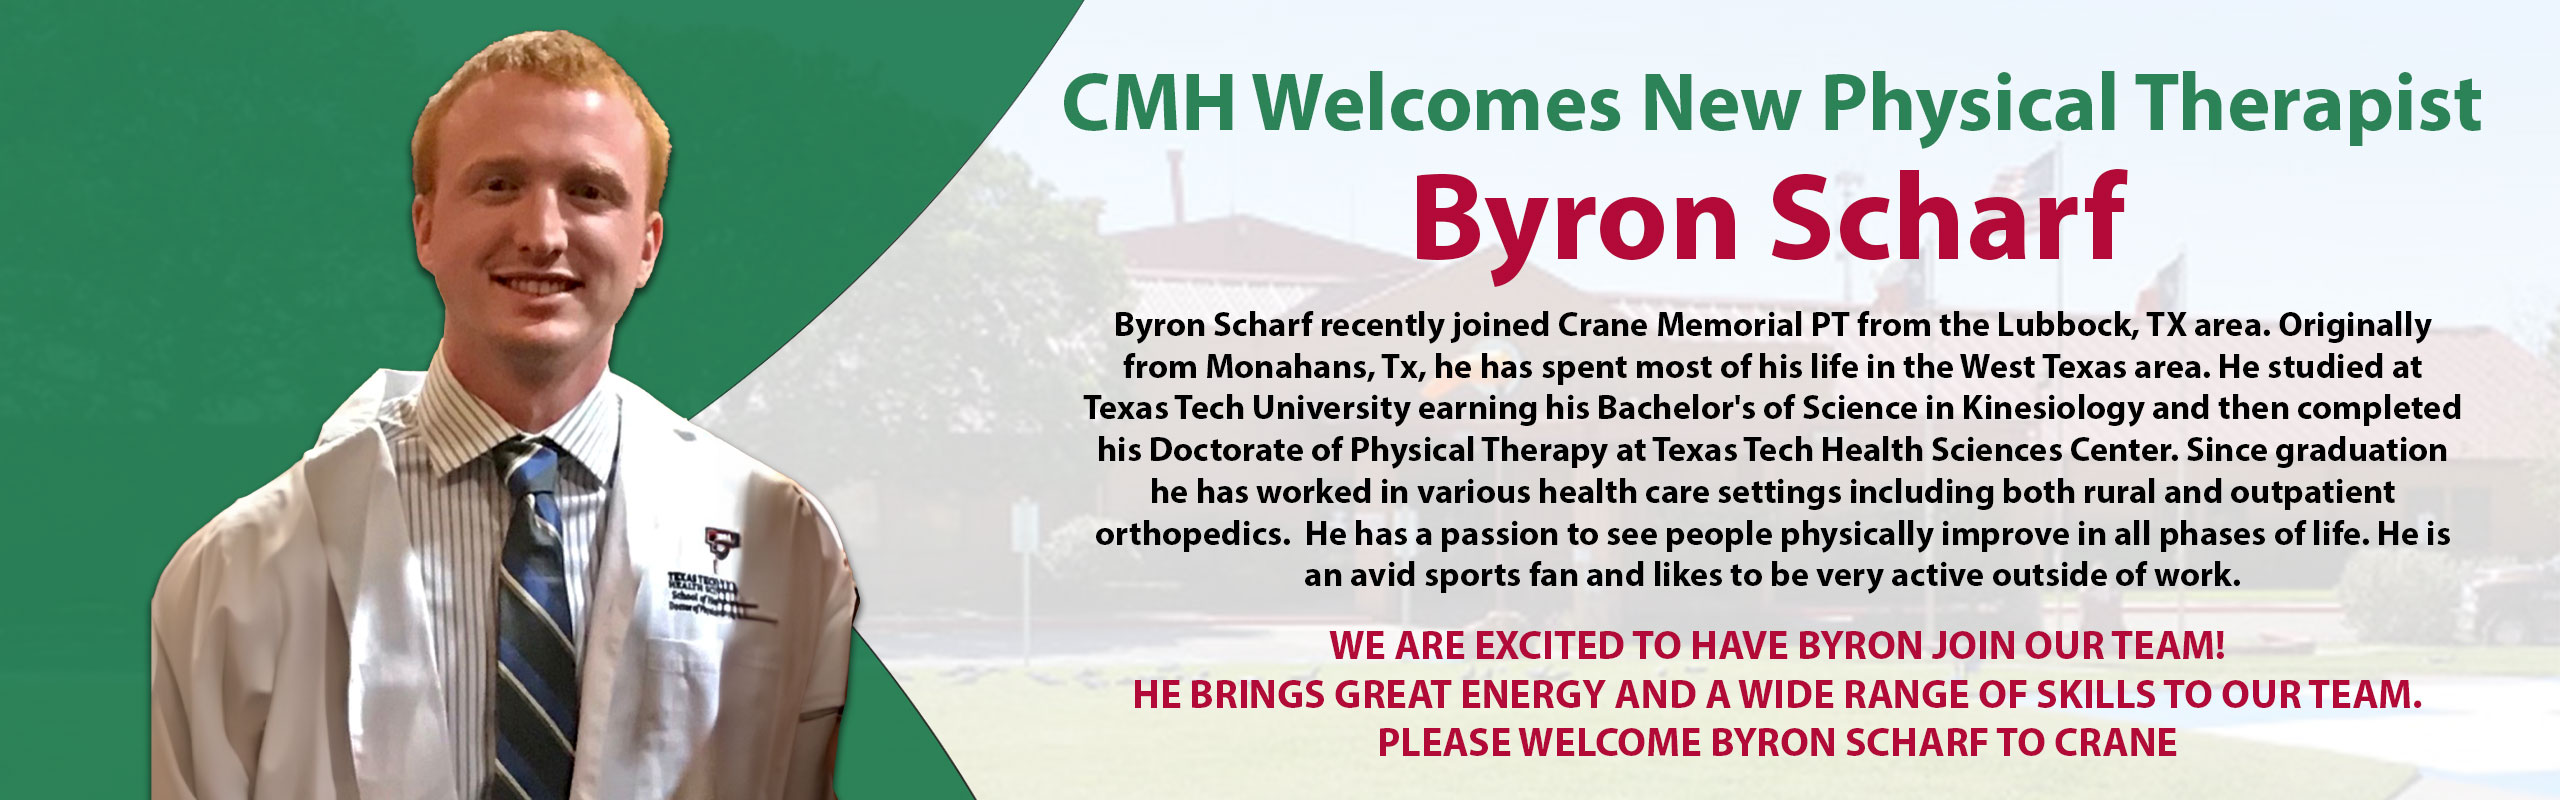 CMH Welcomes New Physical Therapist

Byron Scharf

Byron Scharf recently joined Crane Memorial PT from the Lubbock, TX area. Originally 
from Monahans, Tx, he has spent most of his life in the West Texas area. He studied at 
Texas Tech University earning his Bachelor's of Science in Kinesiology and then completed 
his Doctorate of Physical Therapy at Texas Tech Health Sciences Center. Since graduation 
he has worked in various health care settings including both rural and outpatient 
orthopedics.  He has a passion to see people physically improve in all phases of life. He is 
an avid sports fan and likes to be very active outside of work. 

WE ARE EXCITED TO HAVE BYRON JOIN OUR TEAM! 
HE BRINGS GREAT ENERGY AND A WIDE RANGE OF SKILLS TO OUR TEAM. 
PLEASE WELCOME BYRON SCHARF TO CRANE